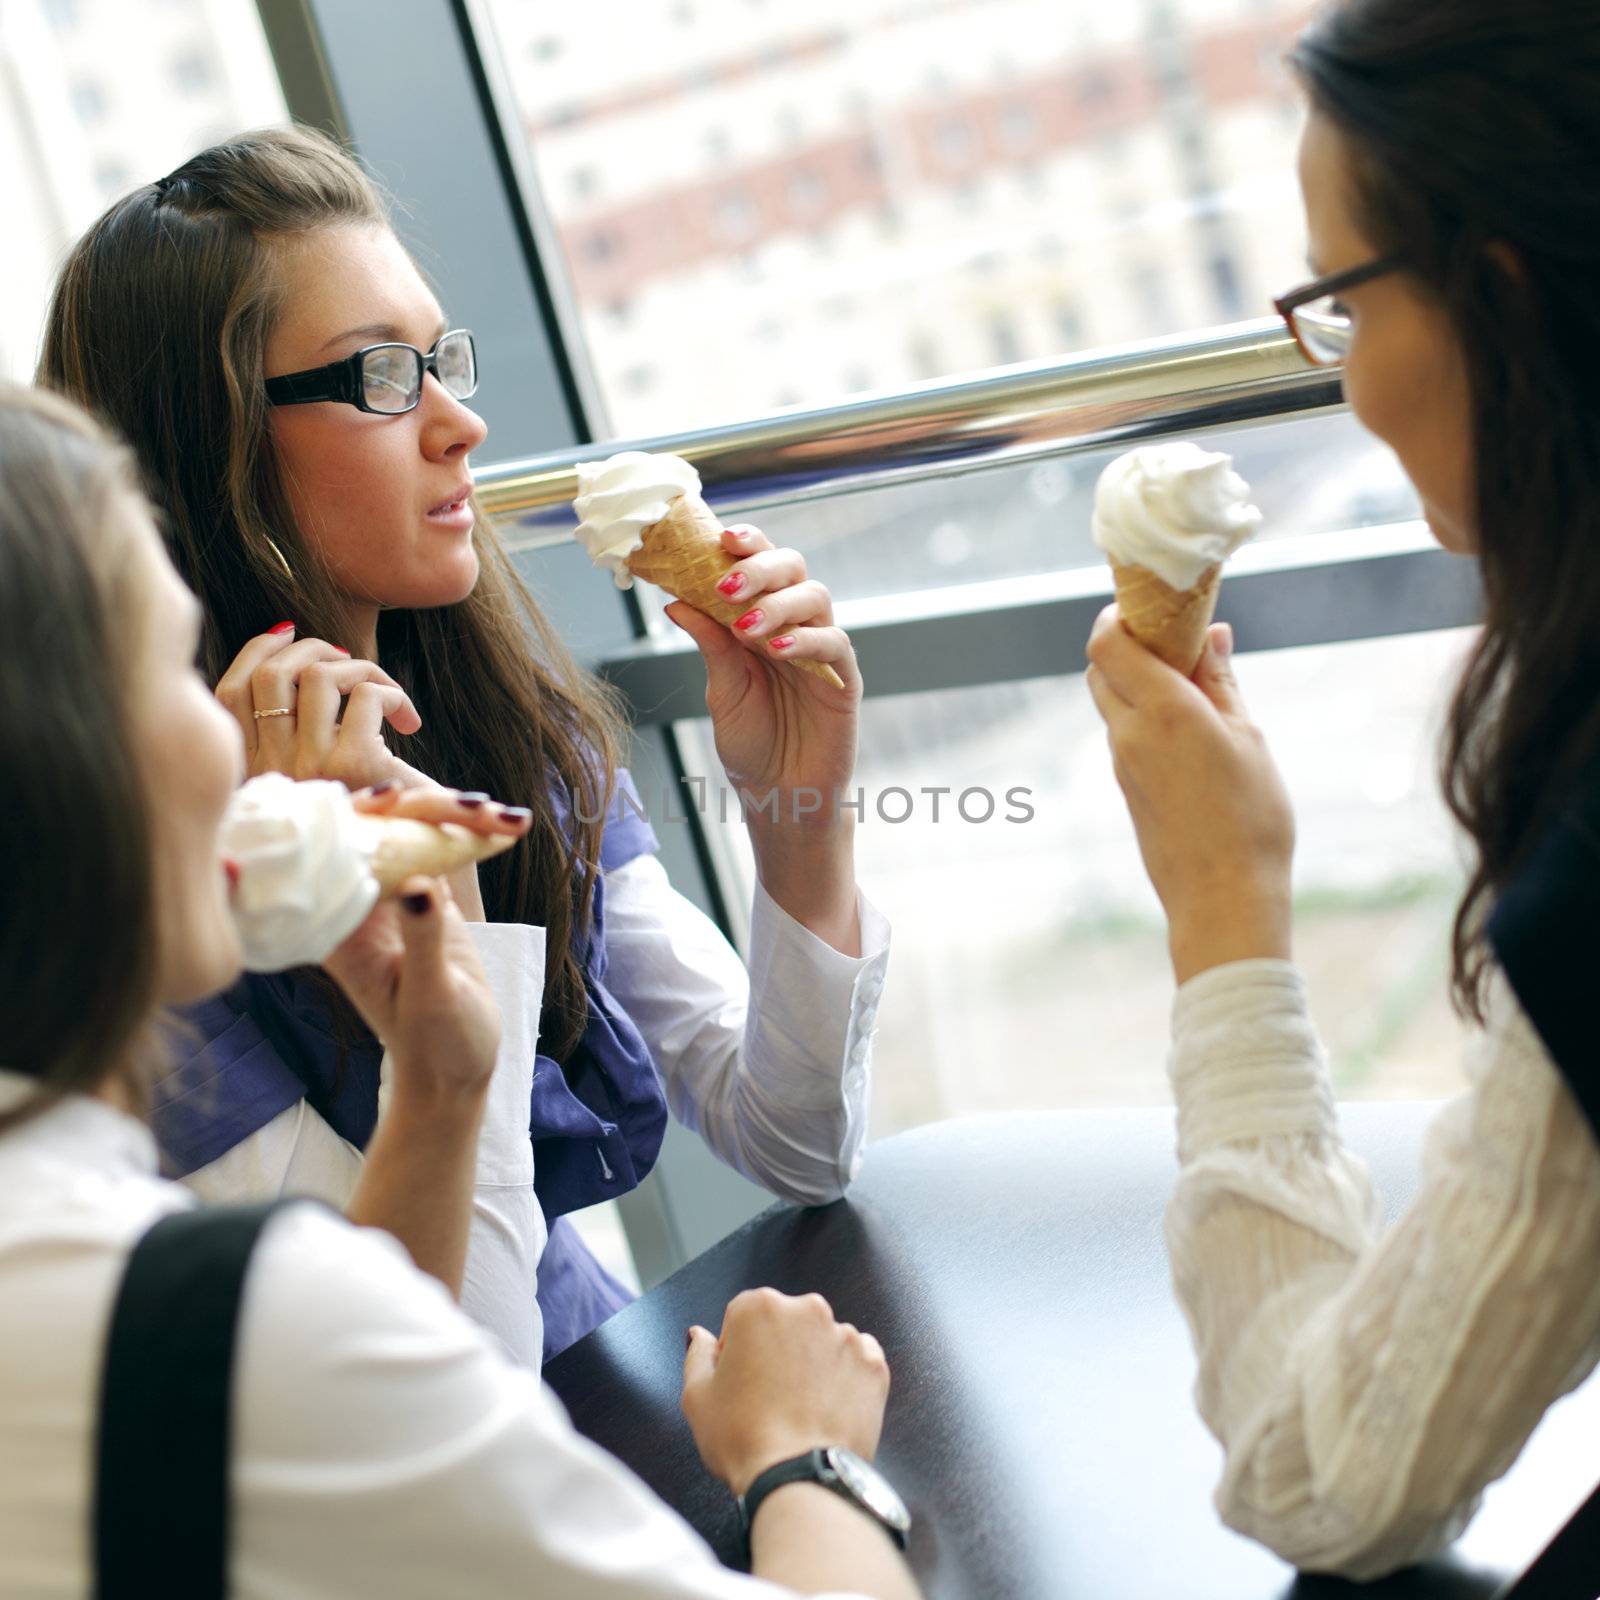 happy smiling women on foreground licking ice cream 